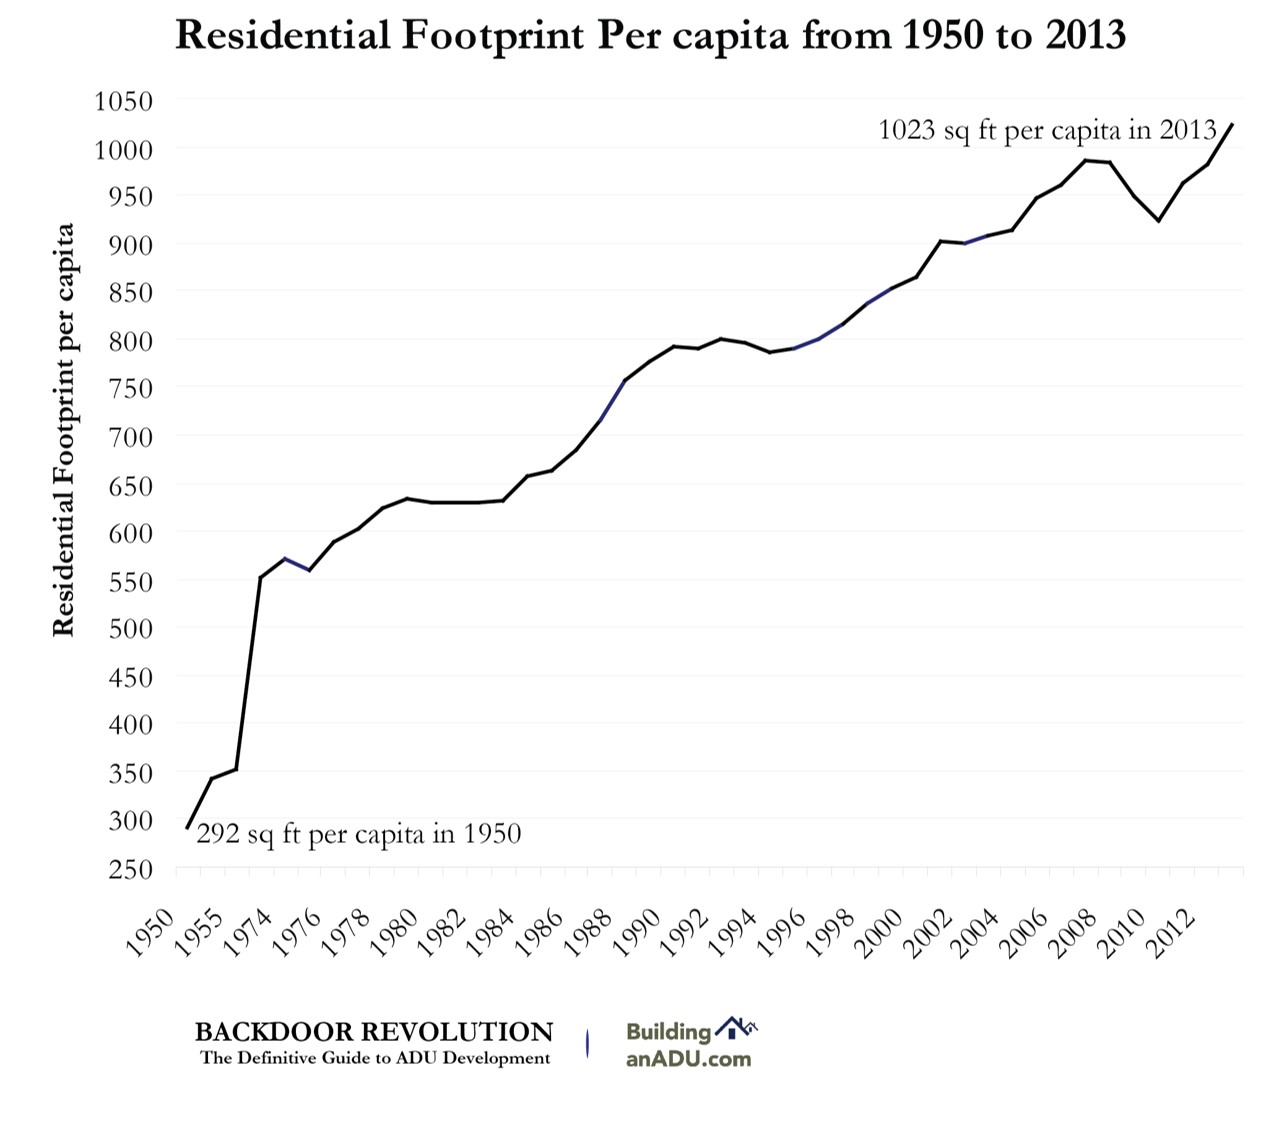  Since the 1950s, shrinking household sizes and the growing size of residential structures has resulted in dramatic increases of per capita residential footprints.&nbsp; 